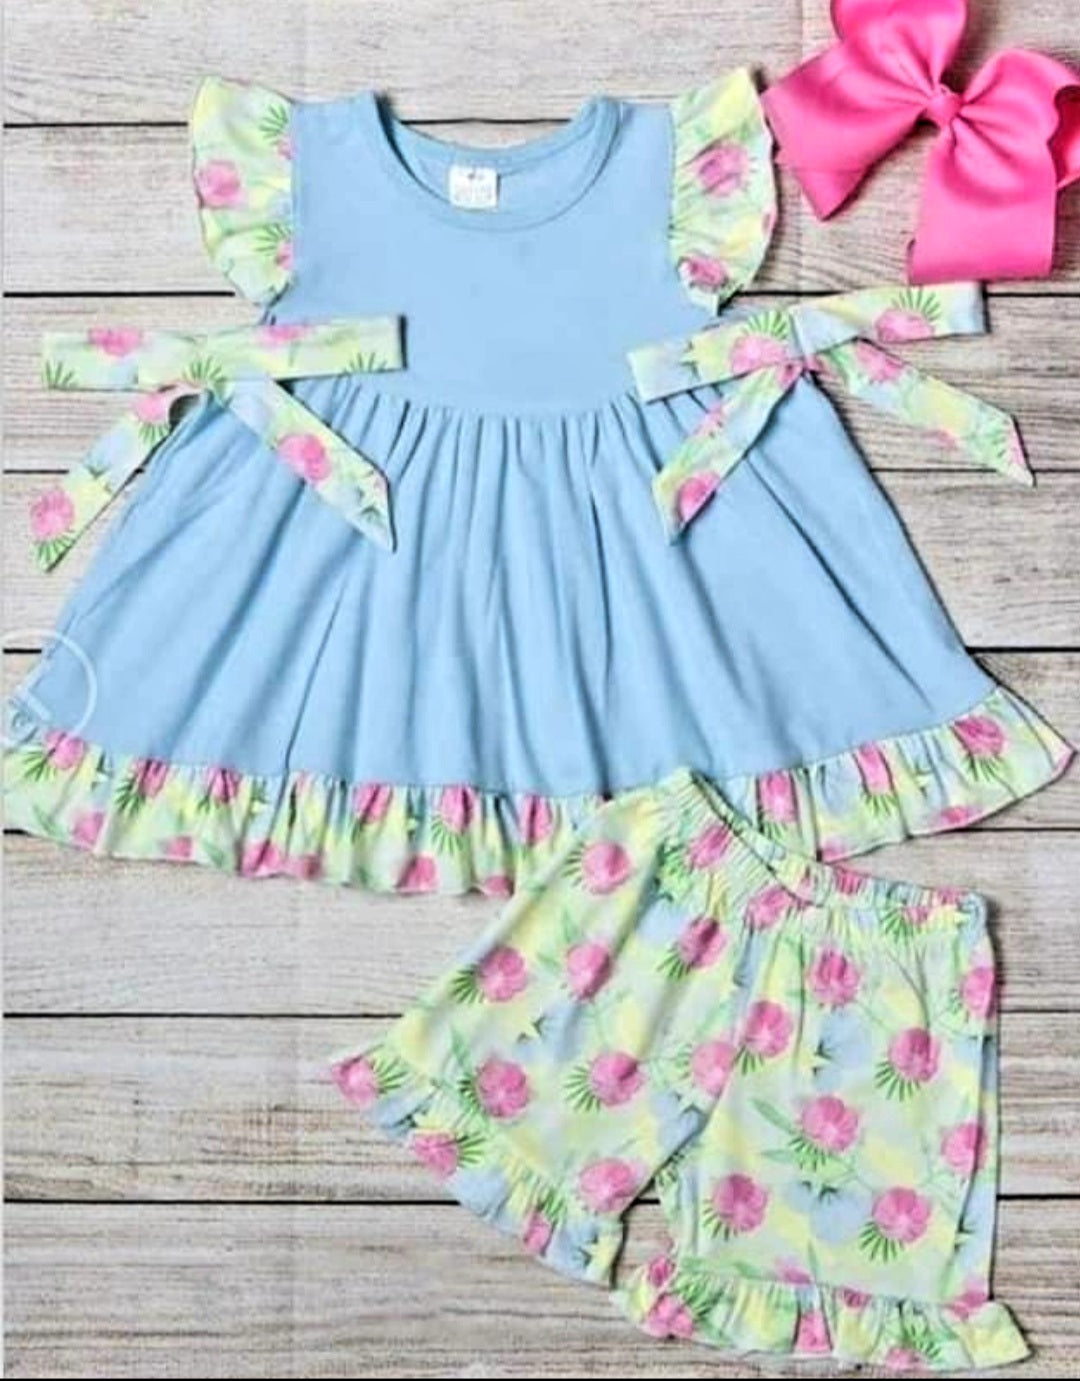 Sweet swing top with bows and ruffle shorties